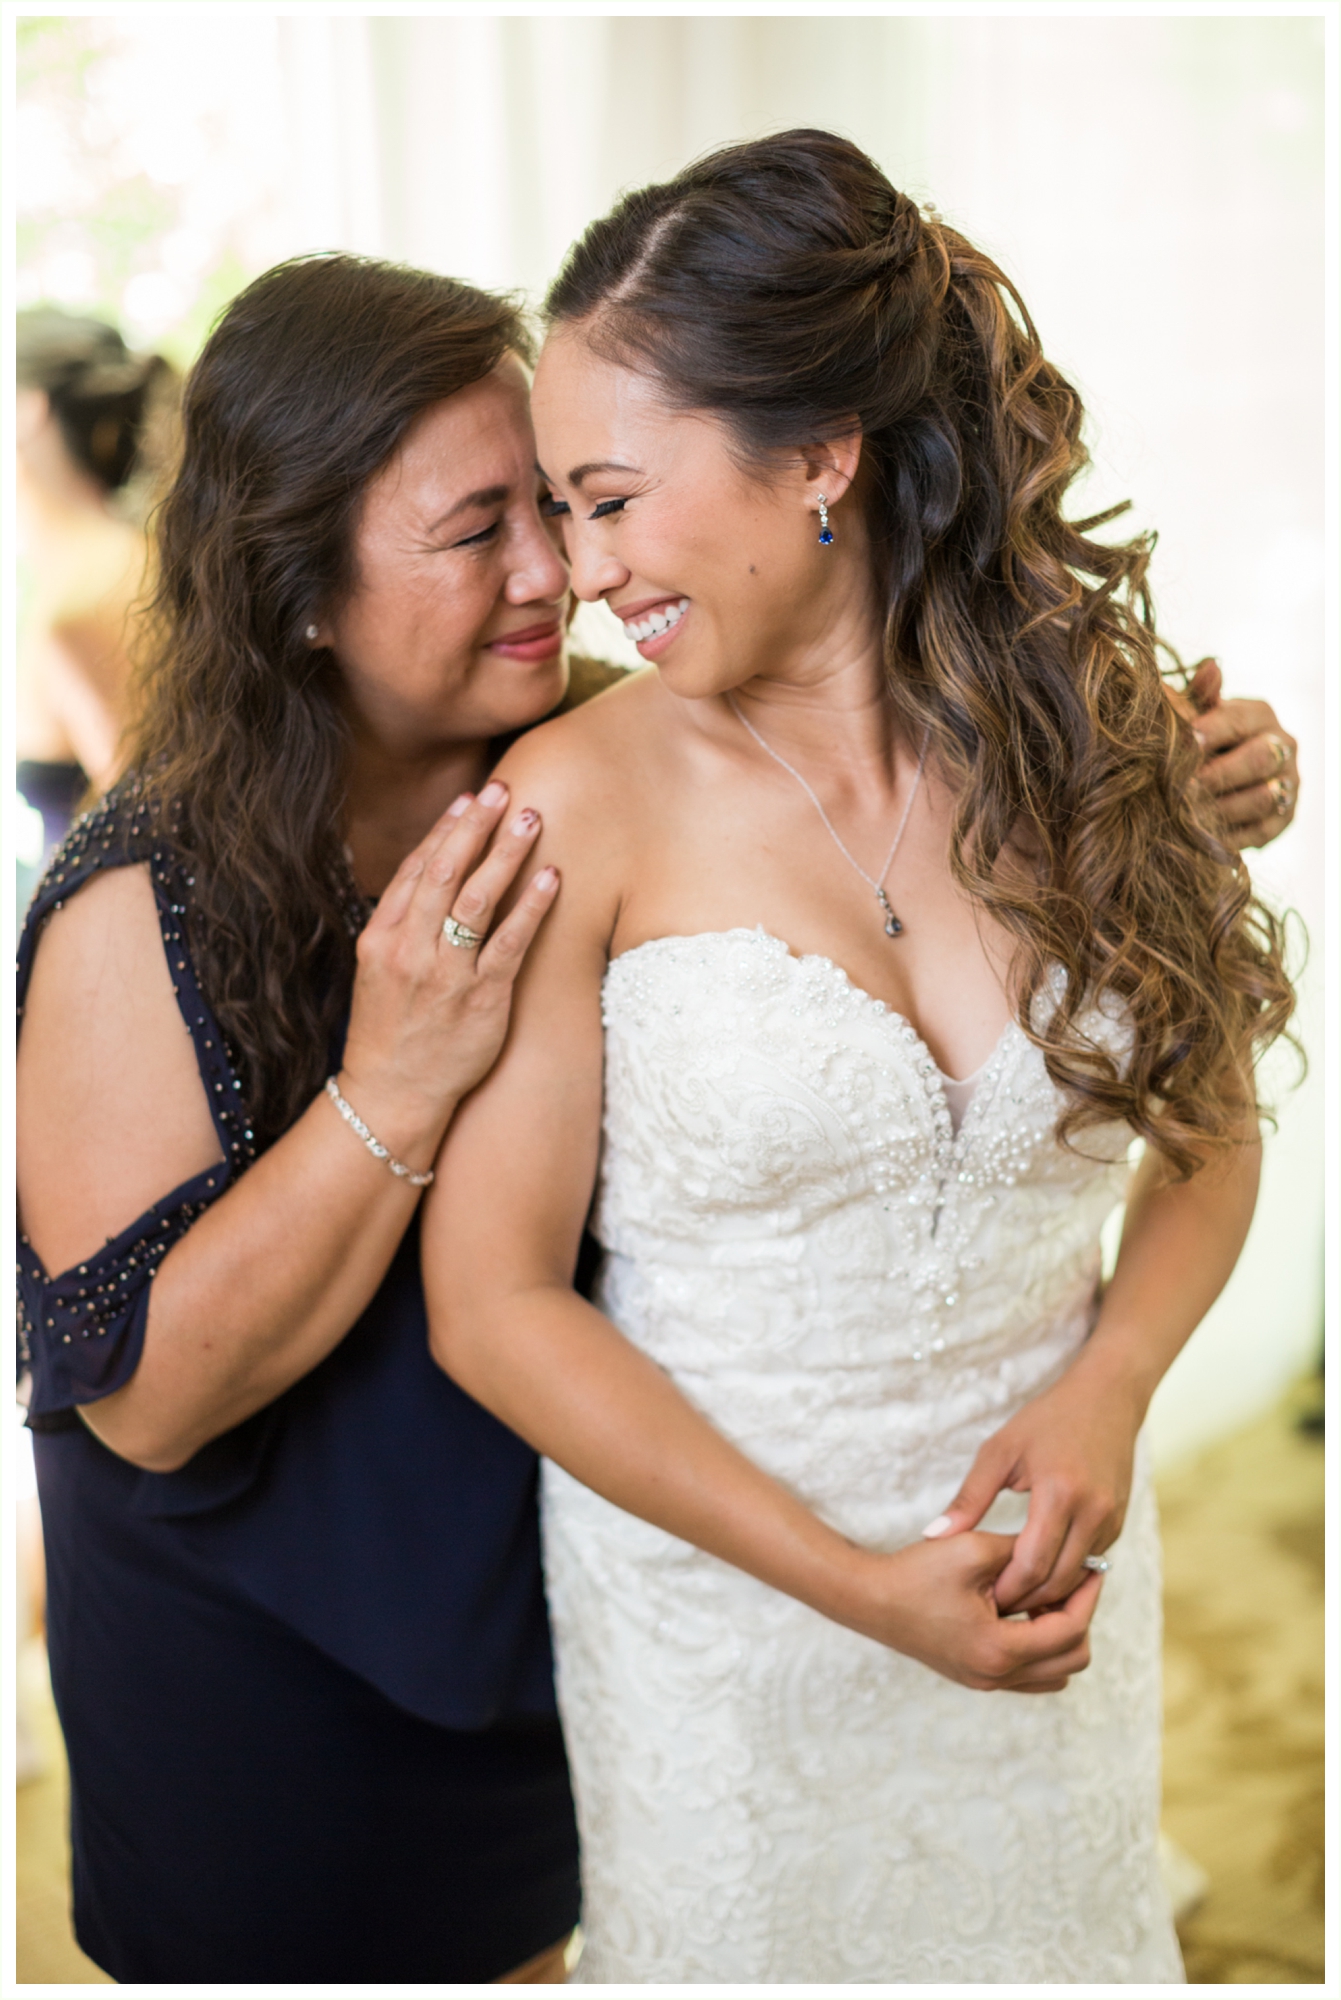 bride shares special moment with her mother during getting ready for wedding